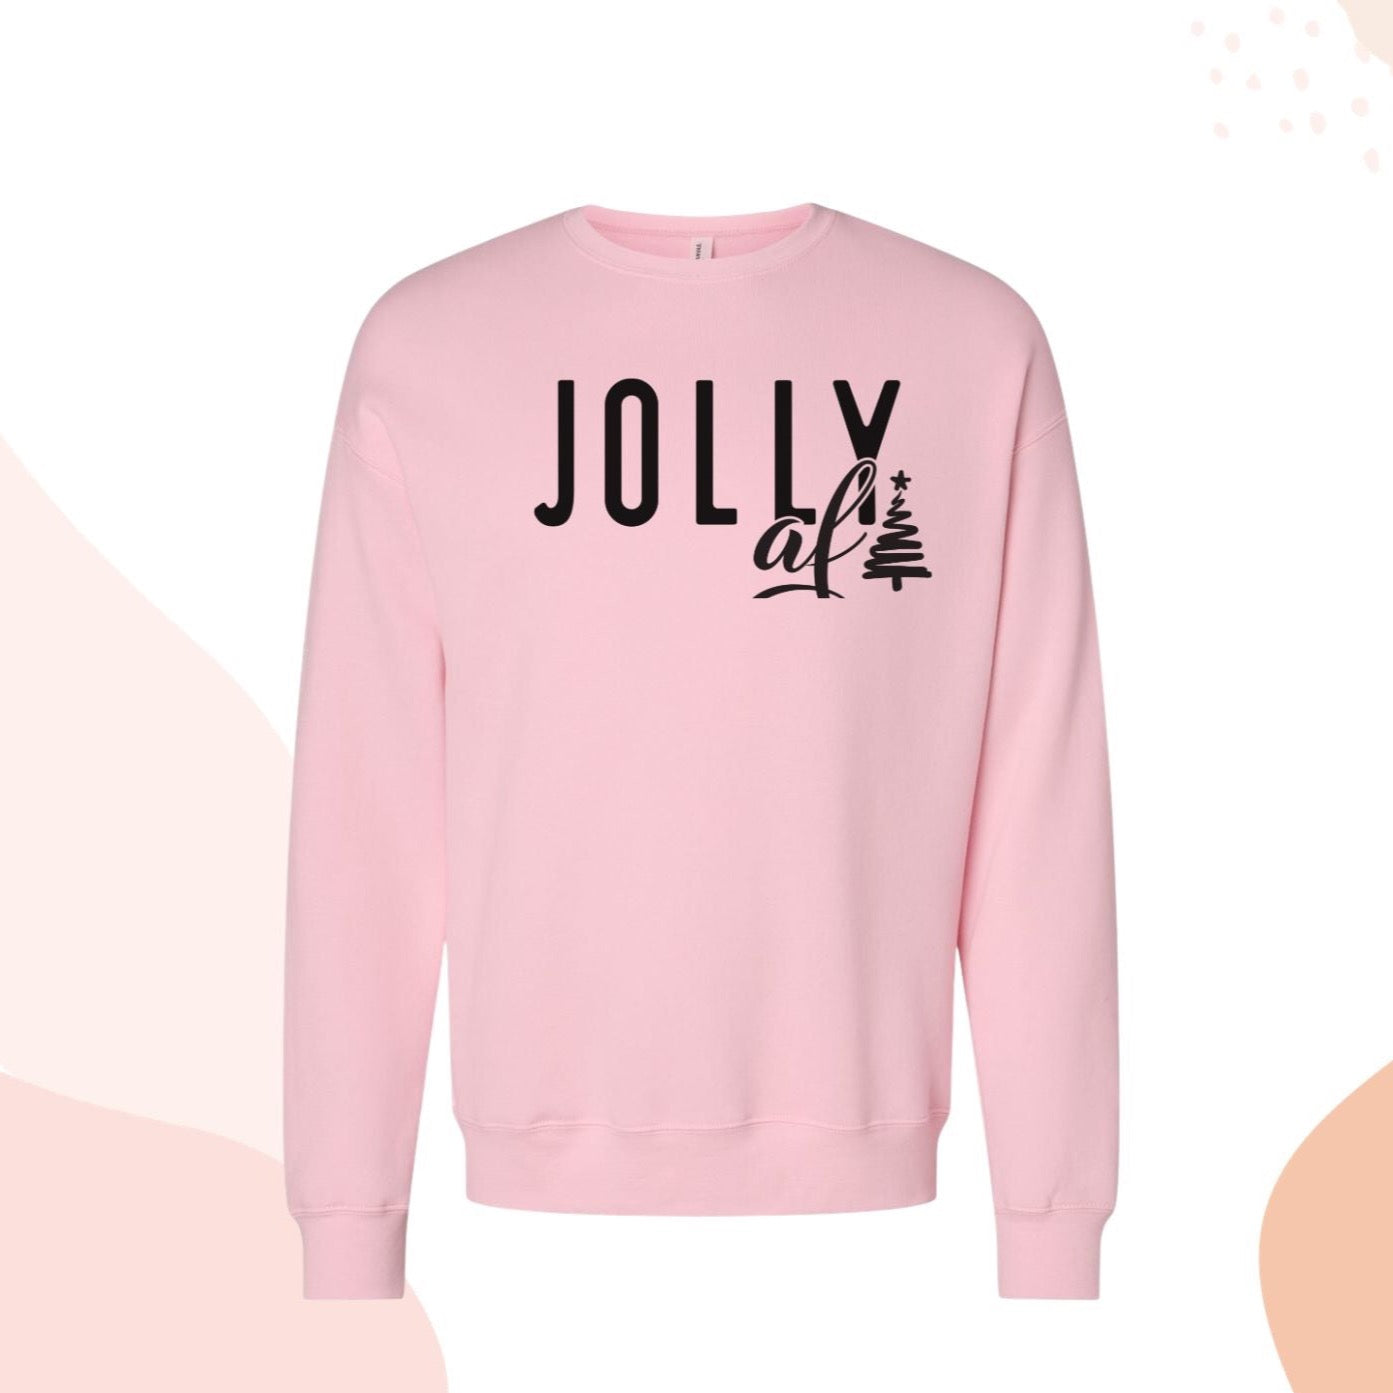 Christmas Sweatshirt Funny Pink Jolly af Crewneck Sweater for Her Christmas Tree Design Humorous Jumper Shirt for Mom Teen Girl